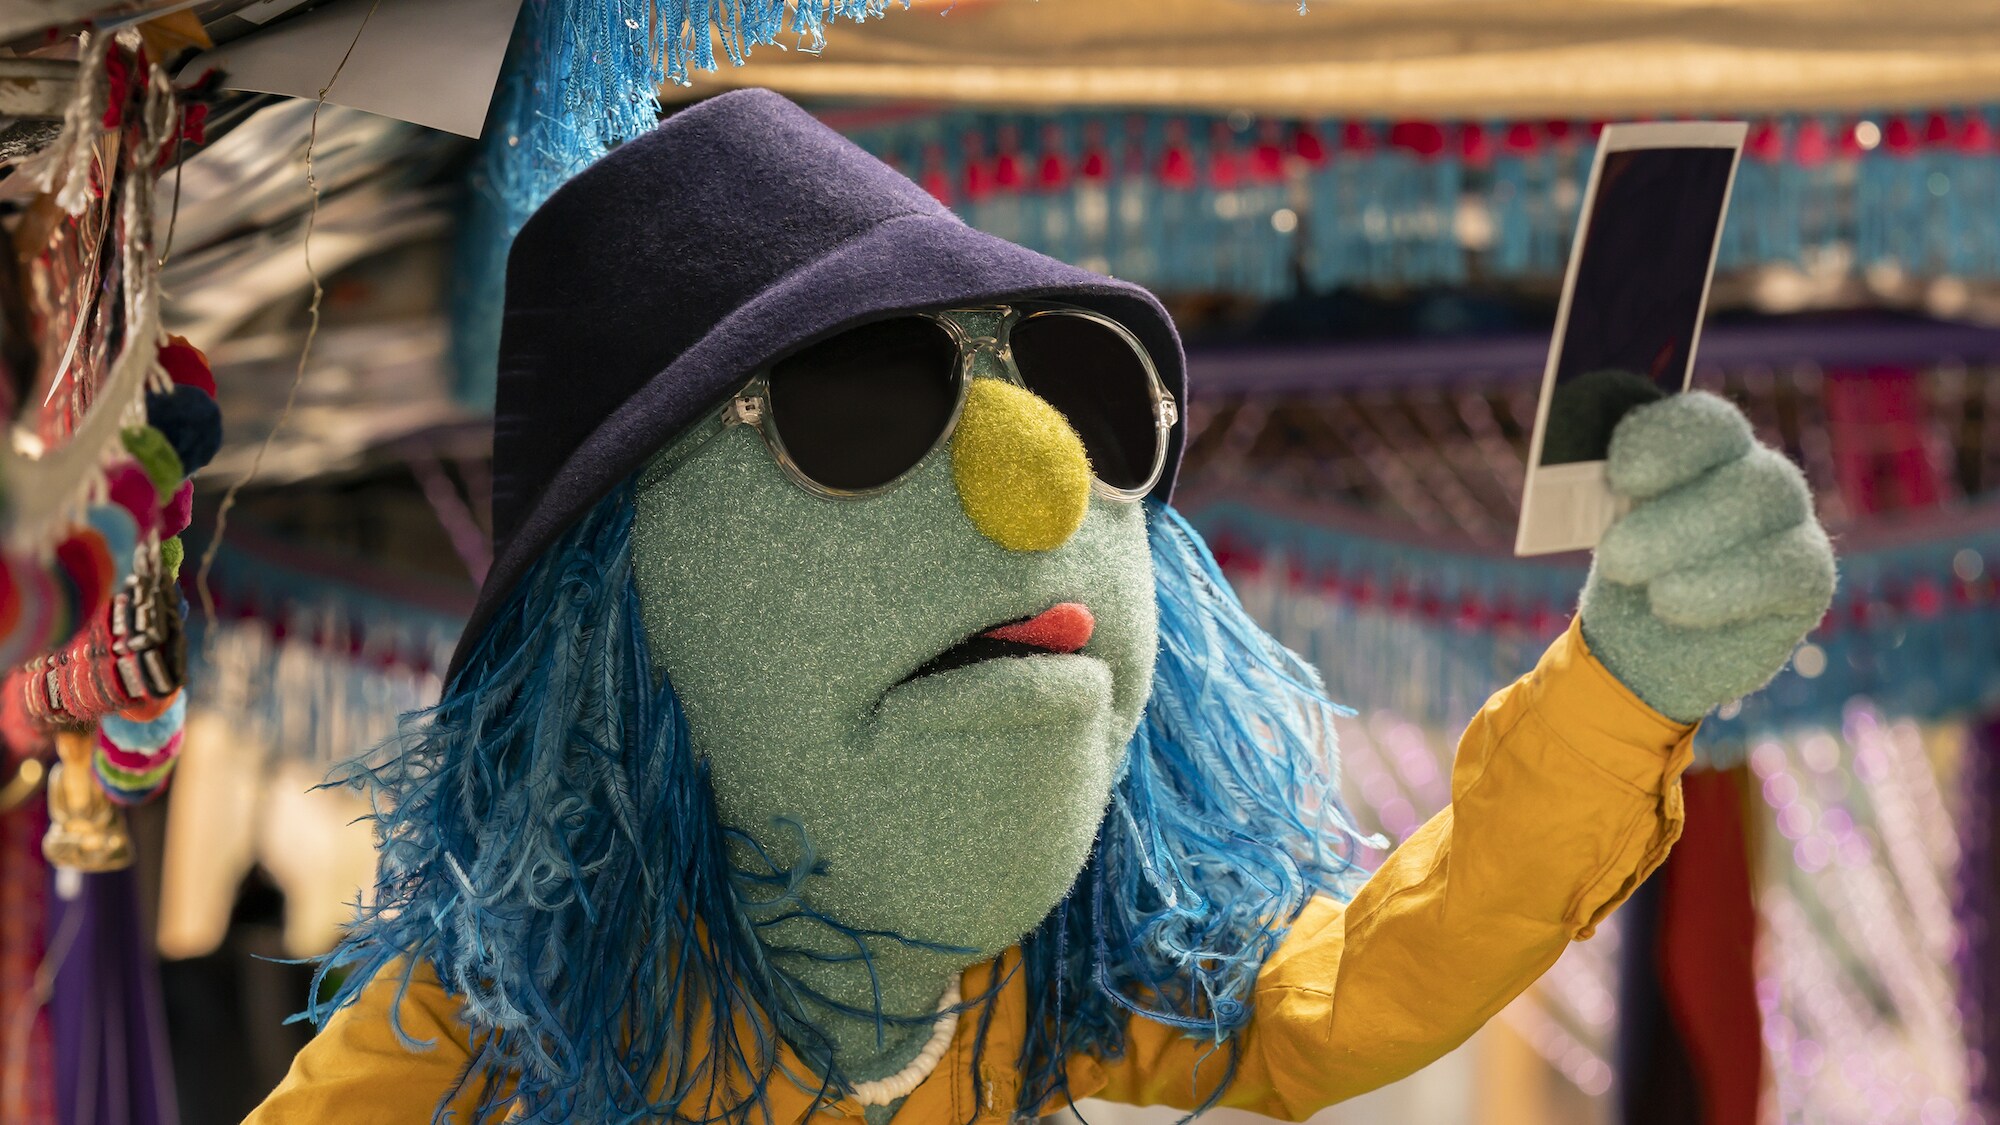 THE MUPPETS MAYHEM - “Track 1: Can You Picture That?” (Disney/Mitch Haaseth) ZOOT